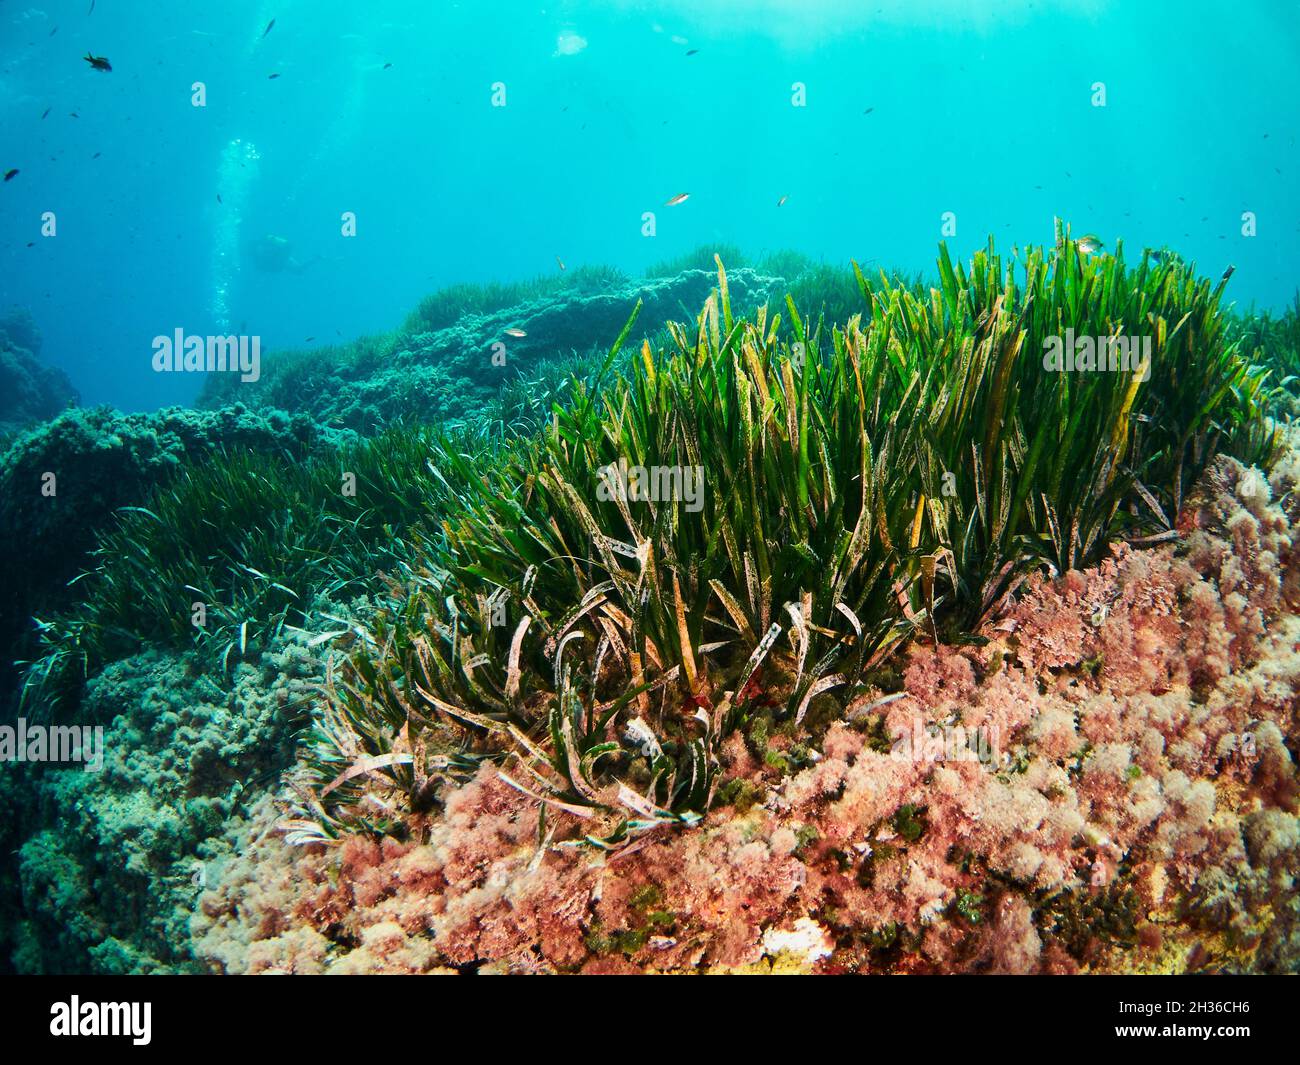 Posidonia Oceanica, also known as Neptune Grass, is an endemic seagrass from the Mediterranean. It is commonly mistaken with algae but it's a plant. Stock Photo